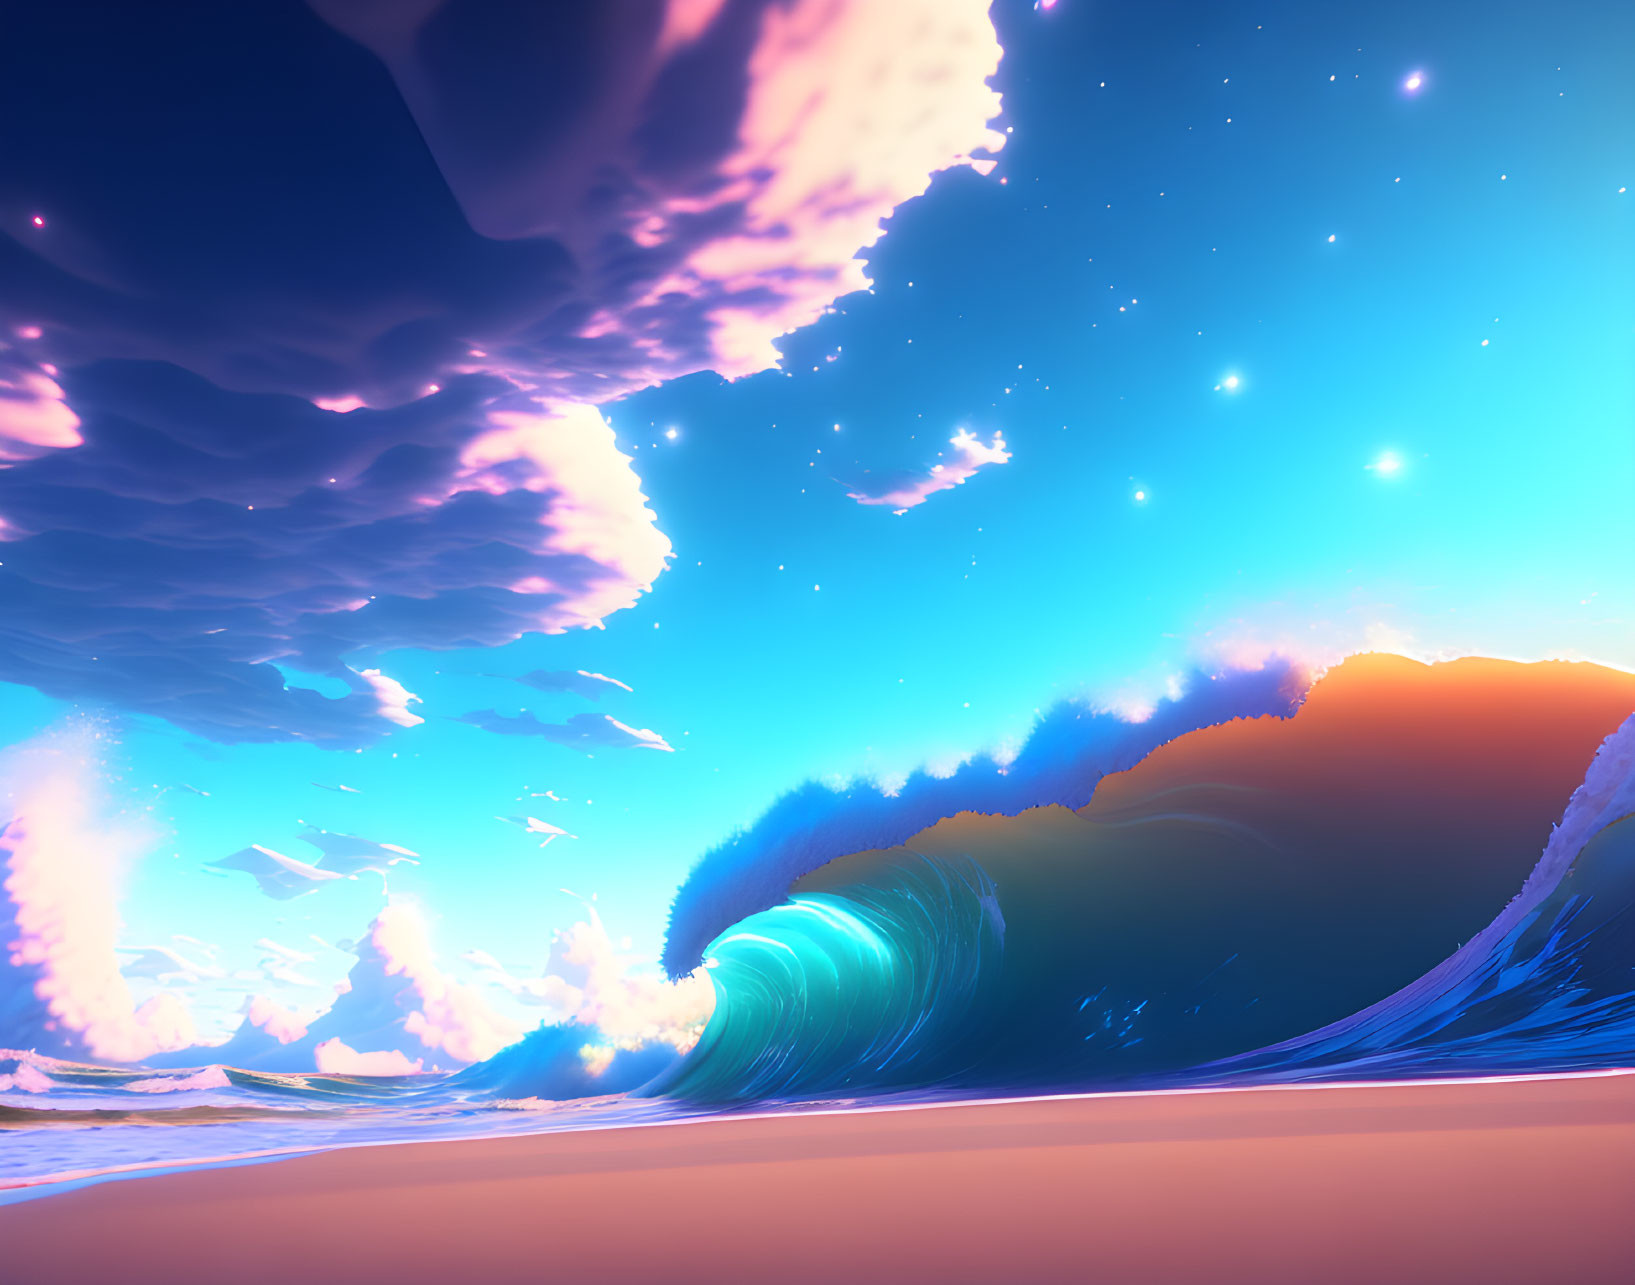 Surreal beach digital art with massive wave under starry sky